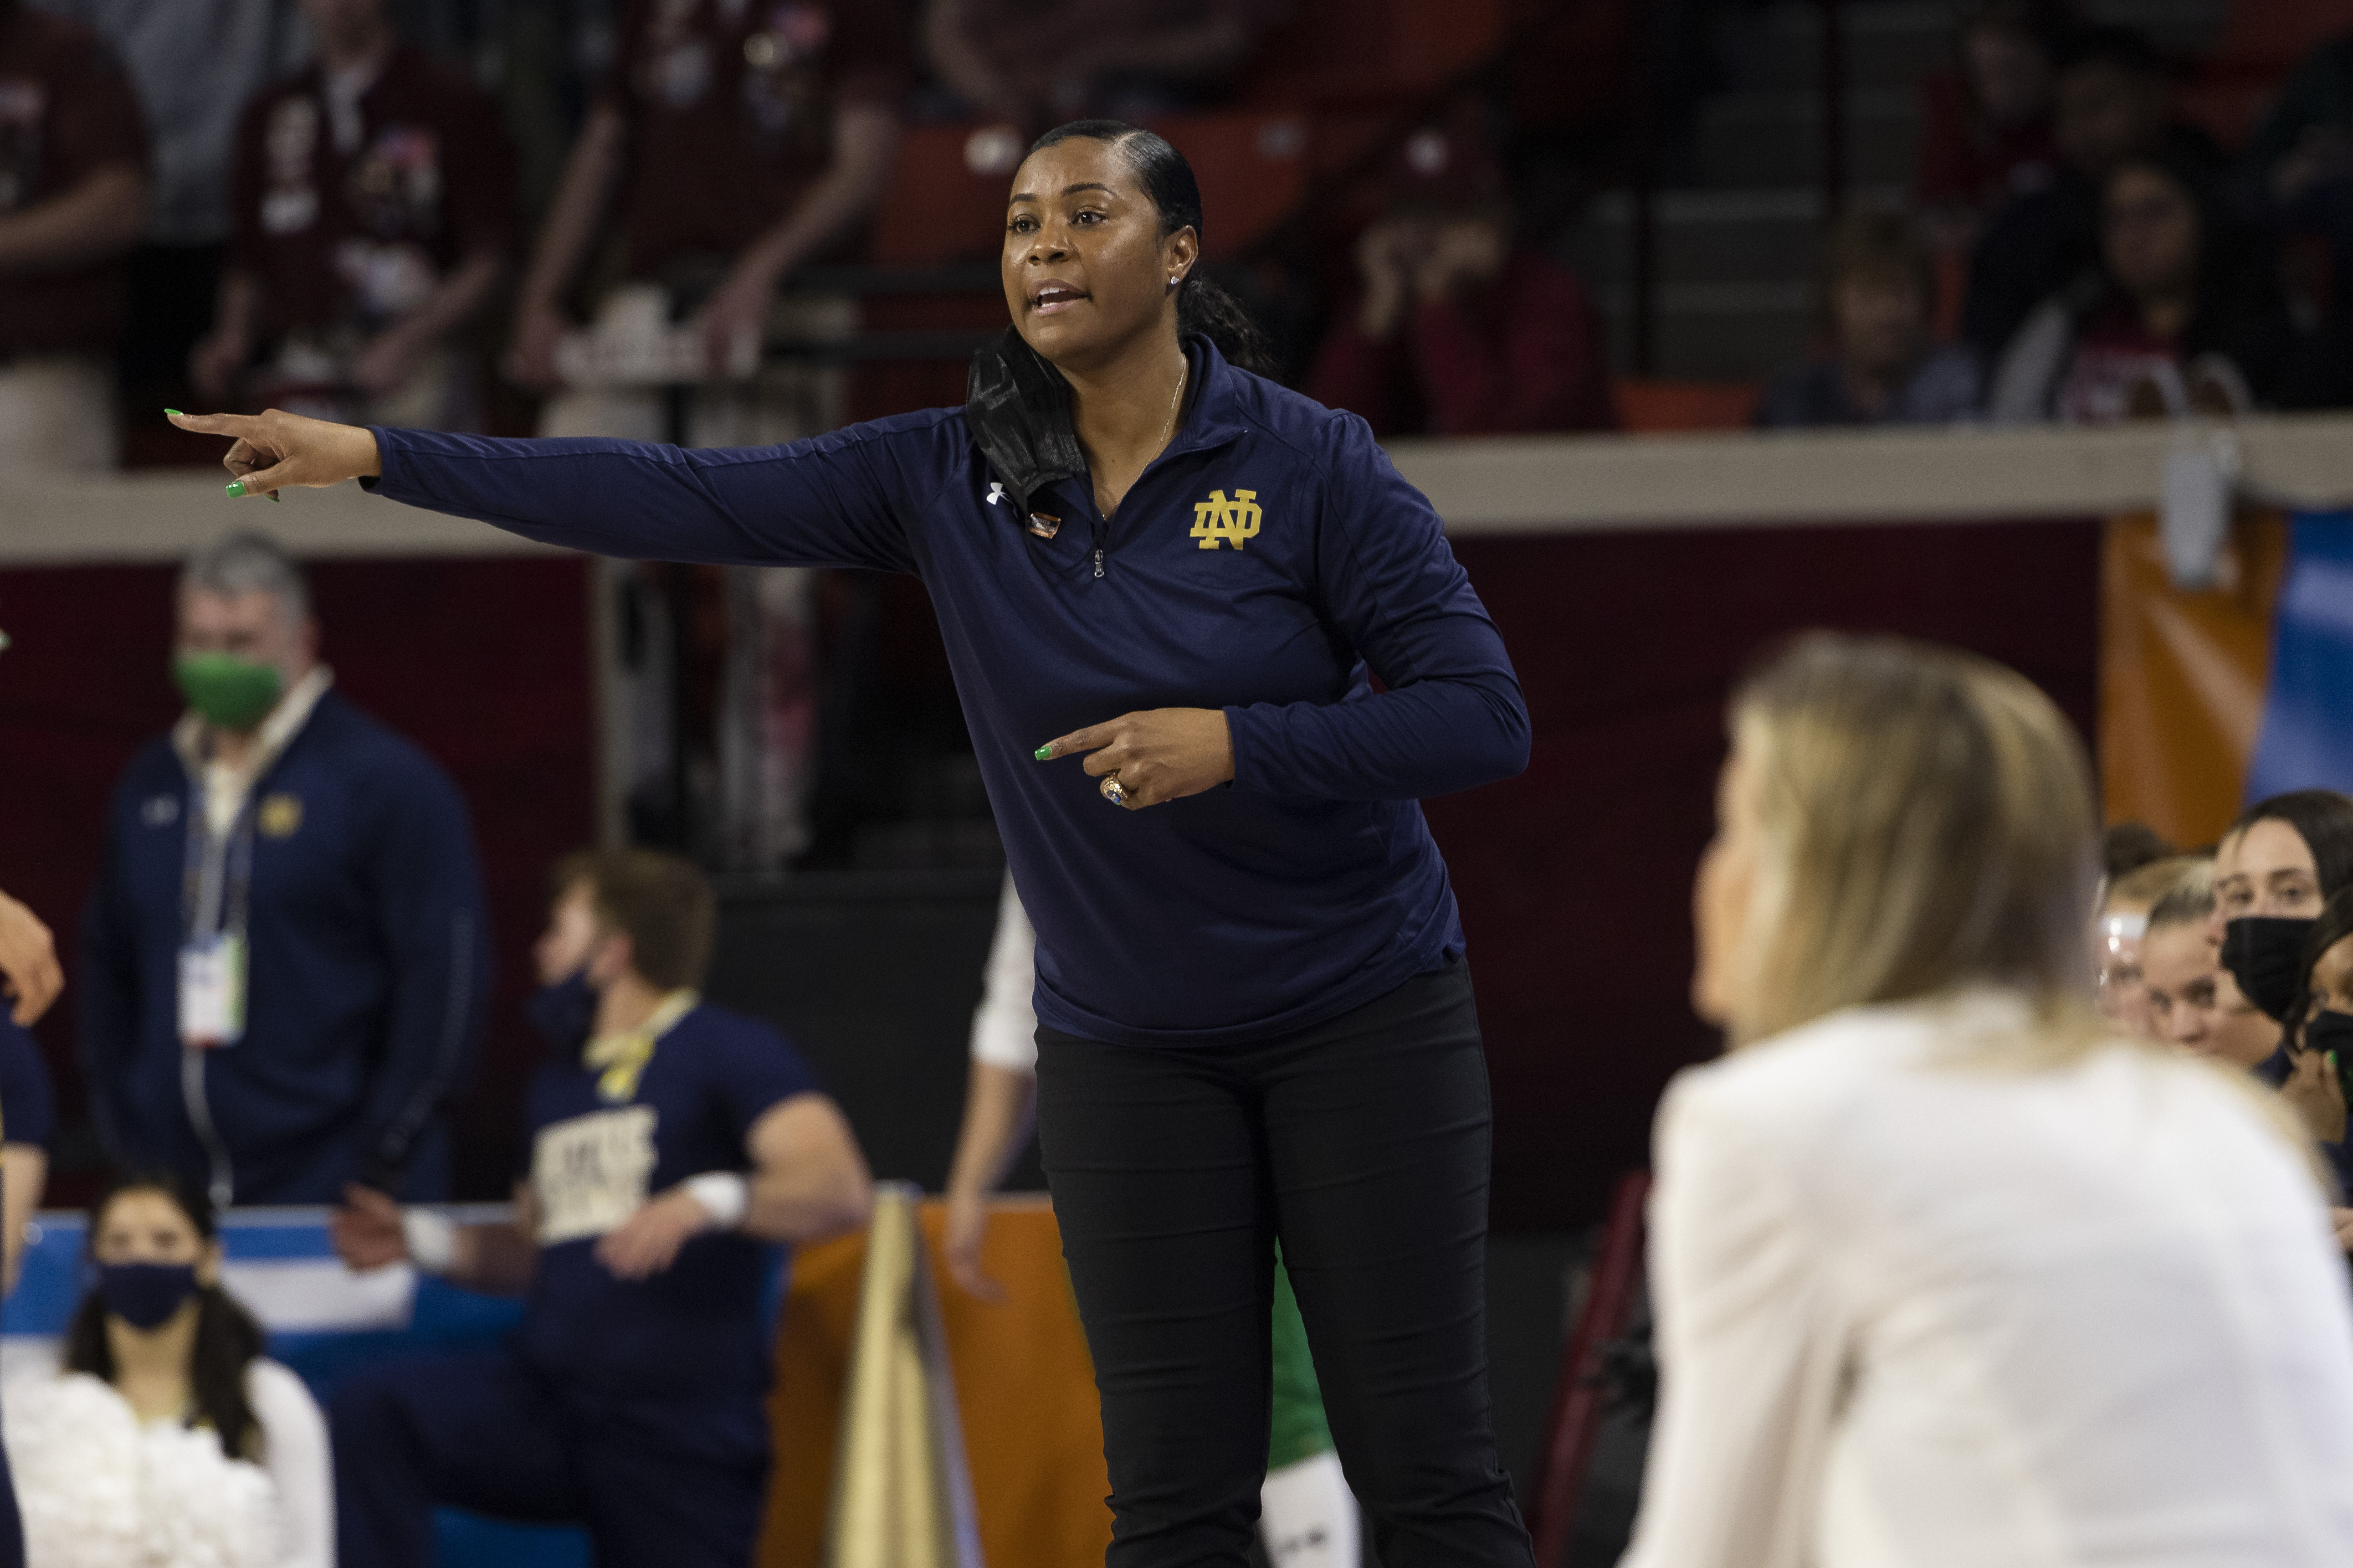 Notre Dame coach Niele Ivey paved the way for her son Jaden's basketball  stardom